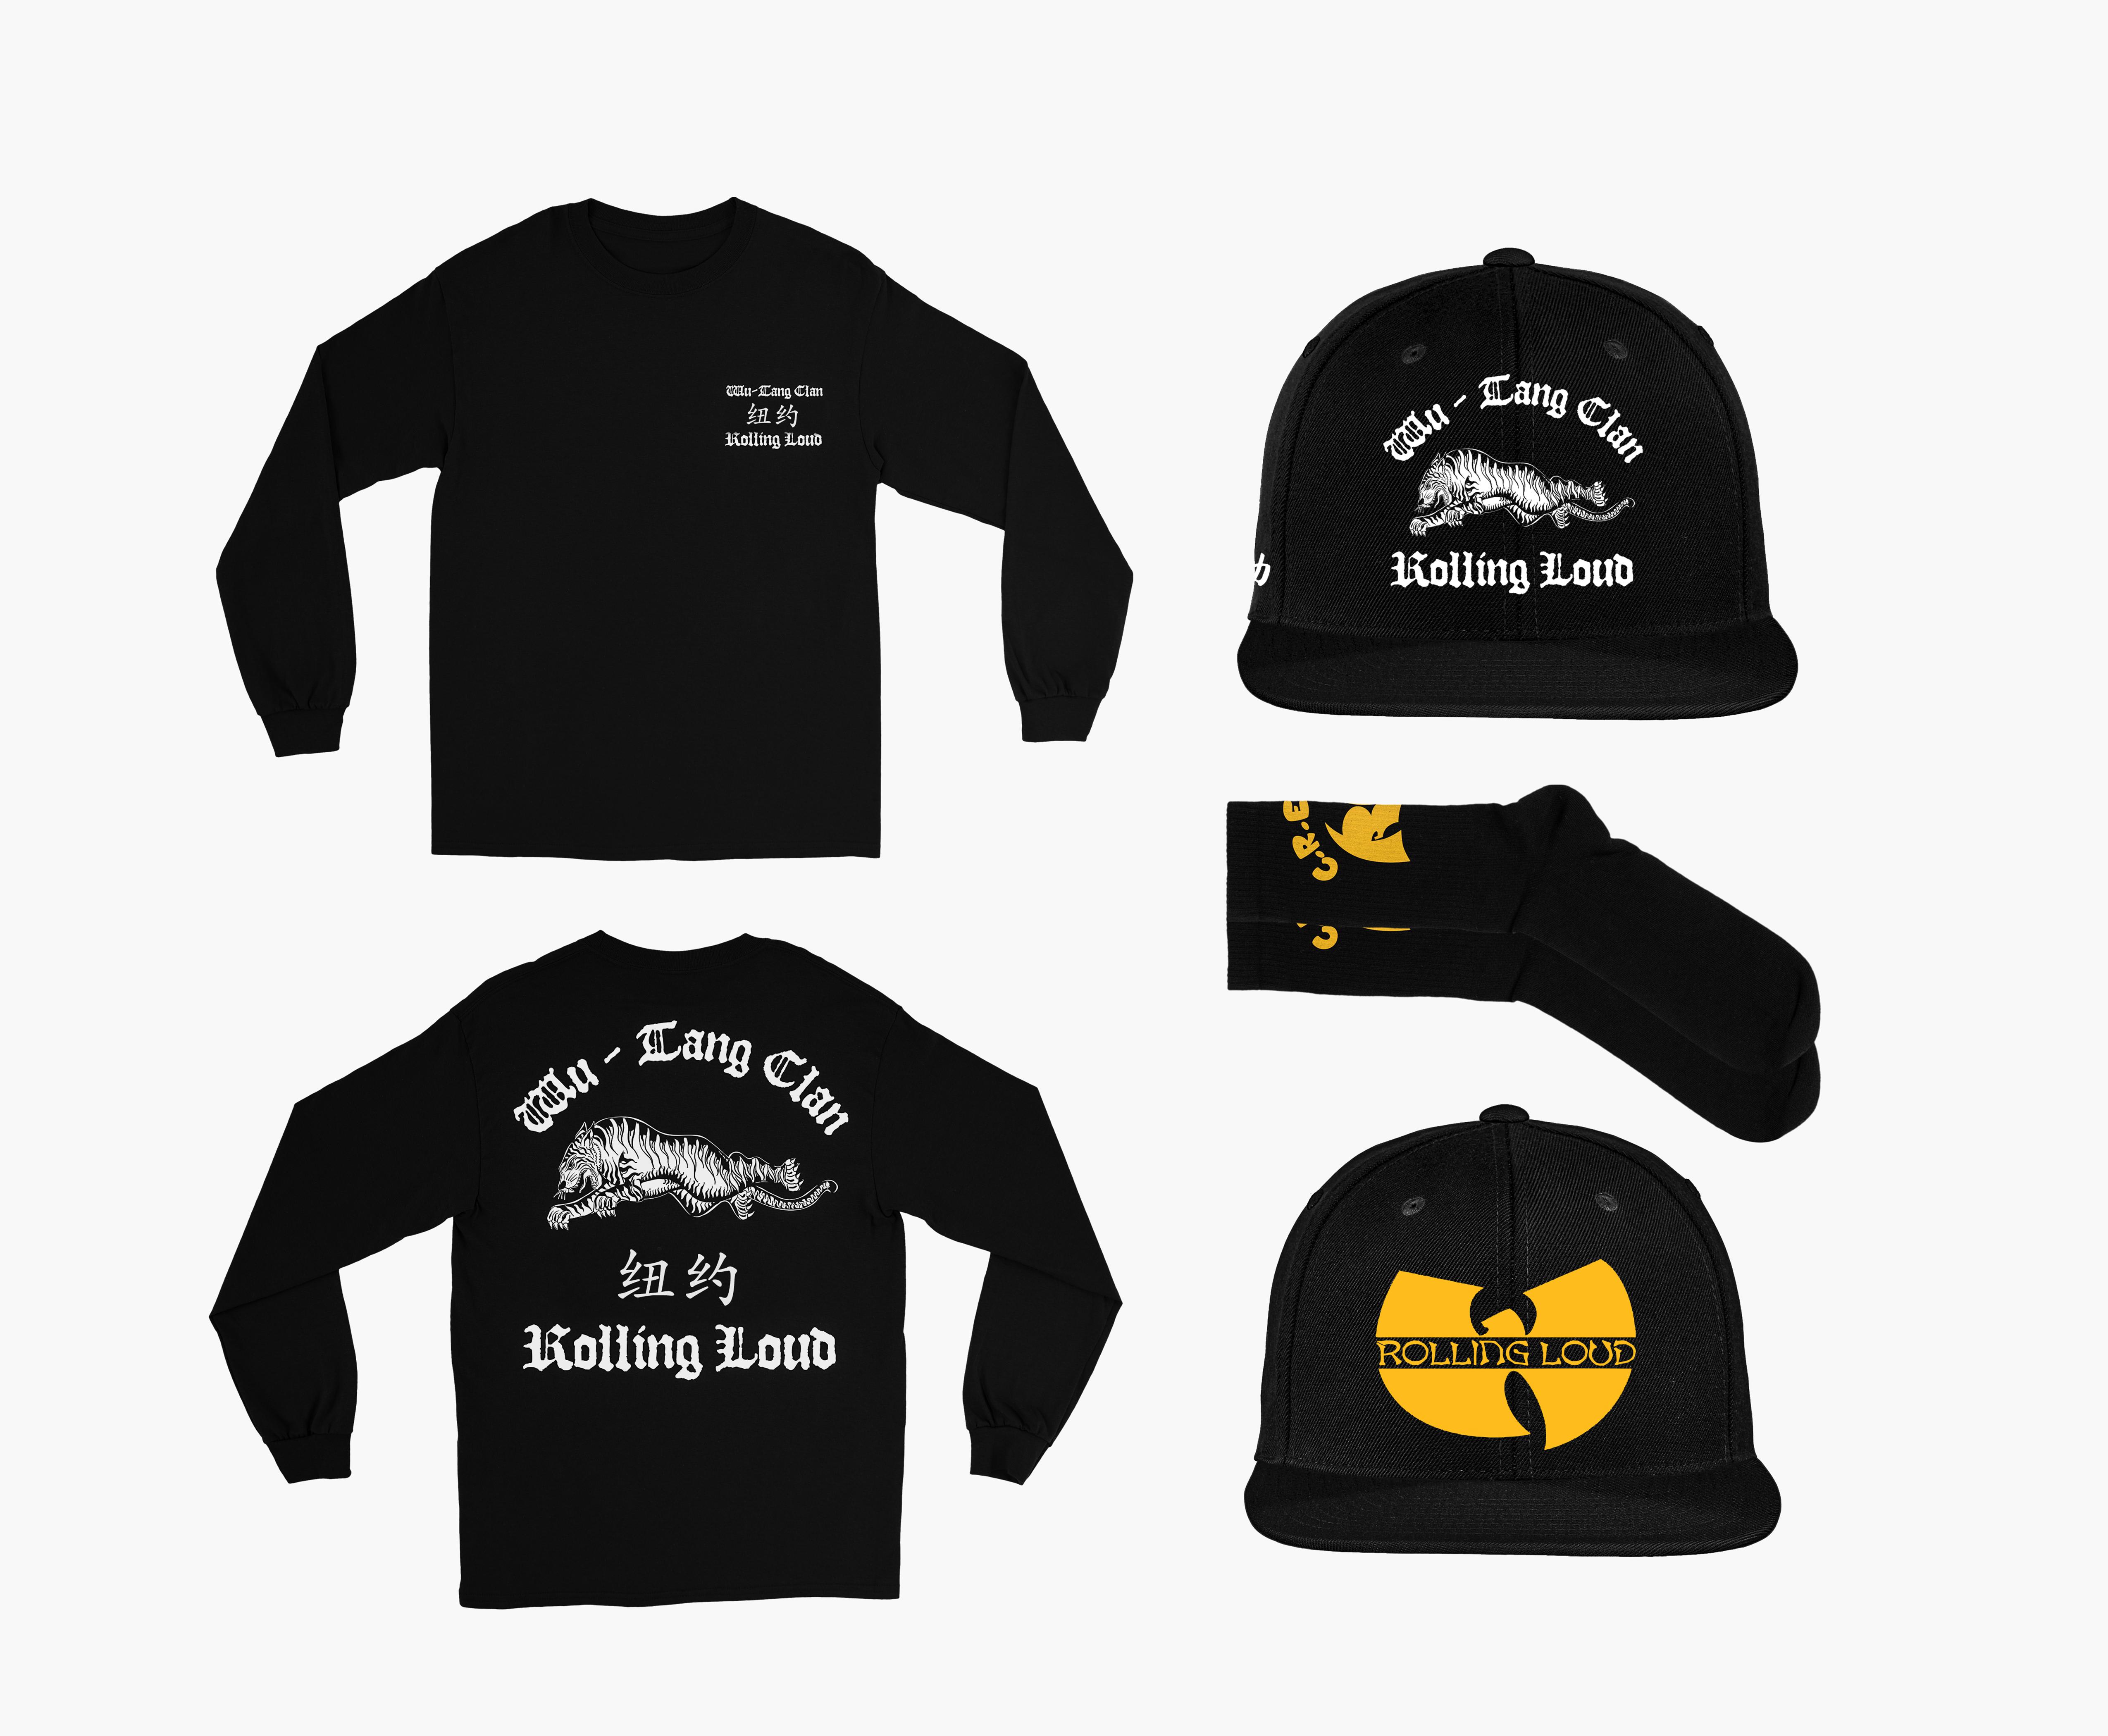 Wu-Tang to Release Limited Capsule Ahead of Rolling Loud NYC